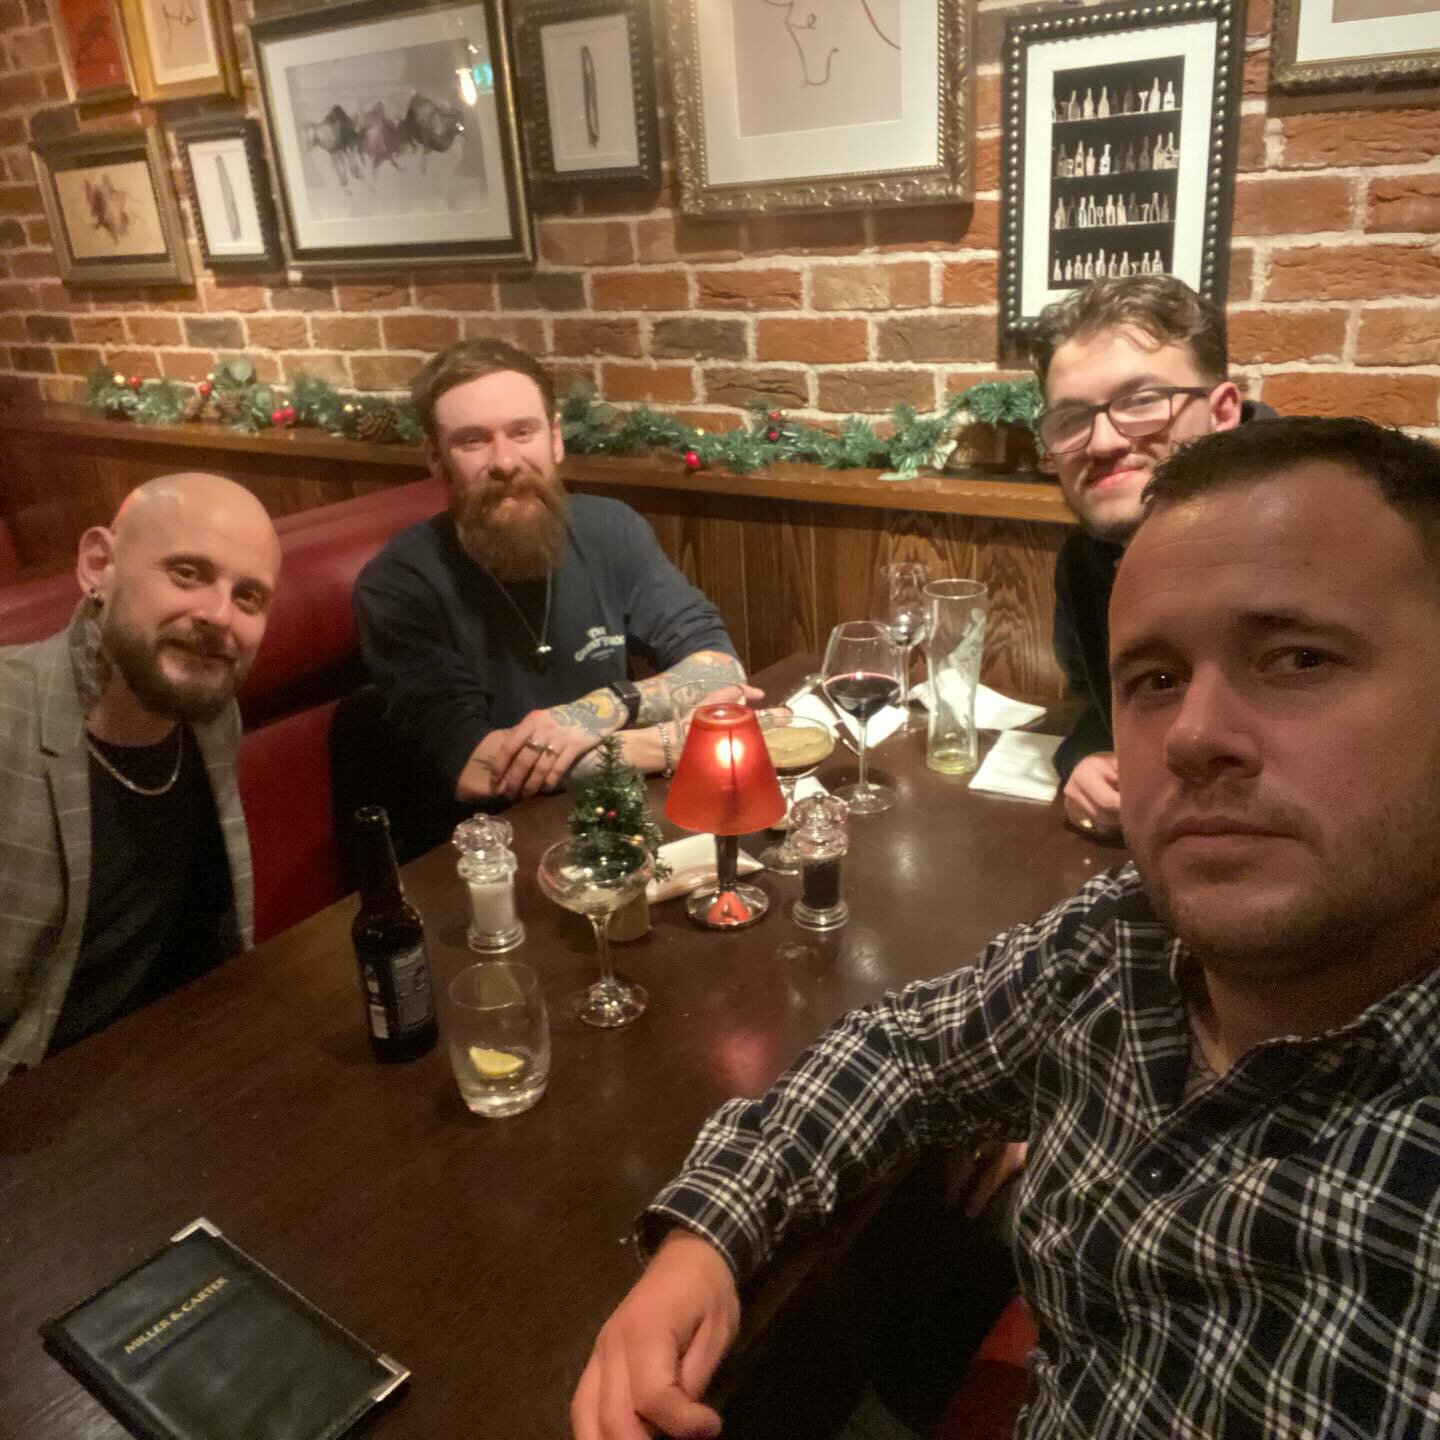 [TEAM CHRISTMAS DO]
-
Tonight the Lowe&rsquo;s Team took some time out, to celebrate the festive period, before our most busy time of the year. 
-
Time to reflect, catch up and have a few laughs outside of the shop walls at @millerandcarter WSM, enjo